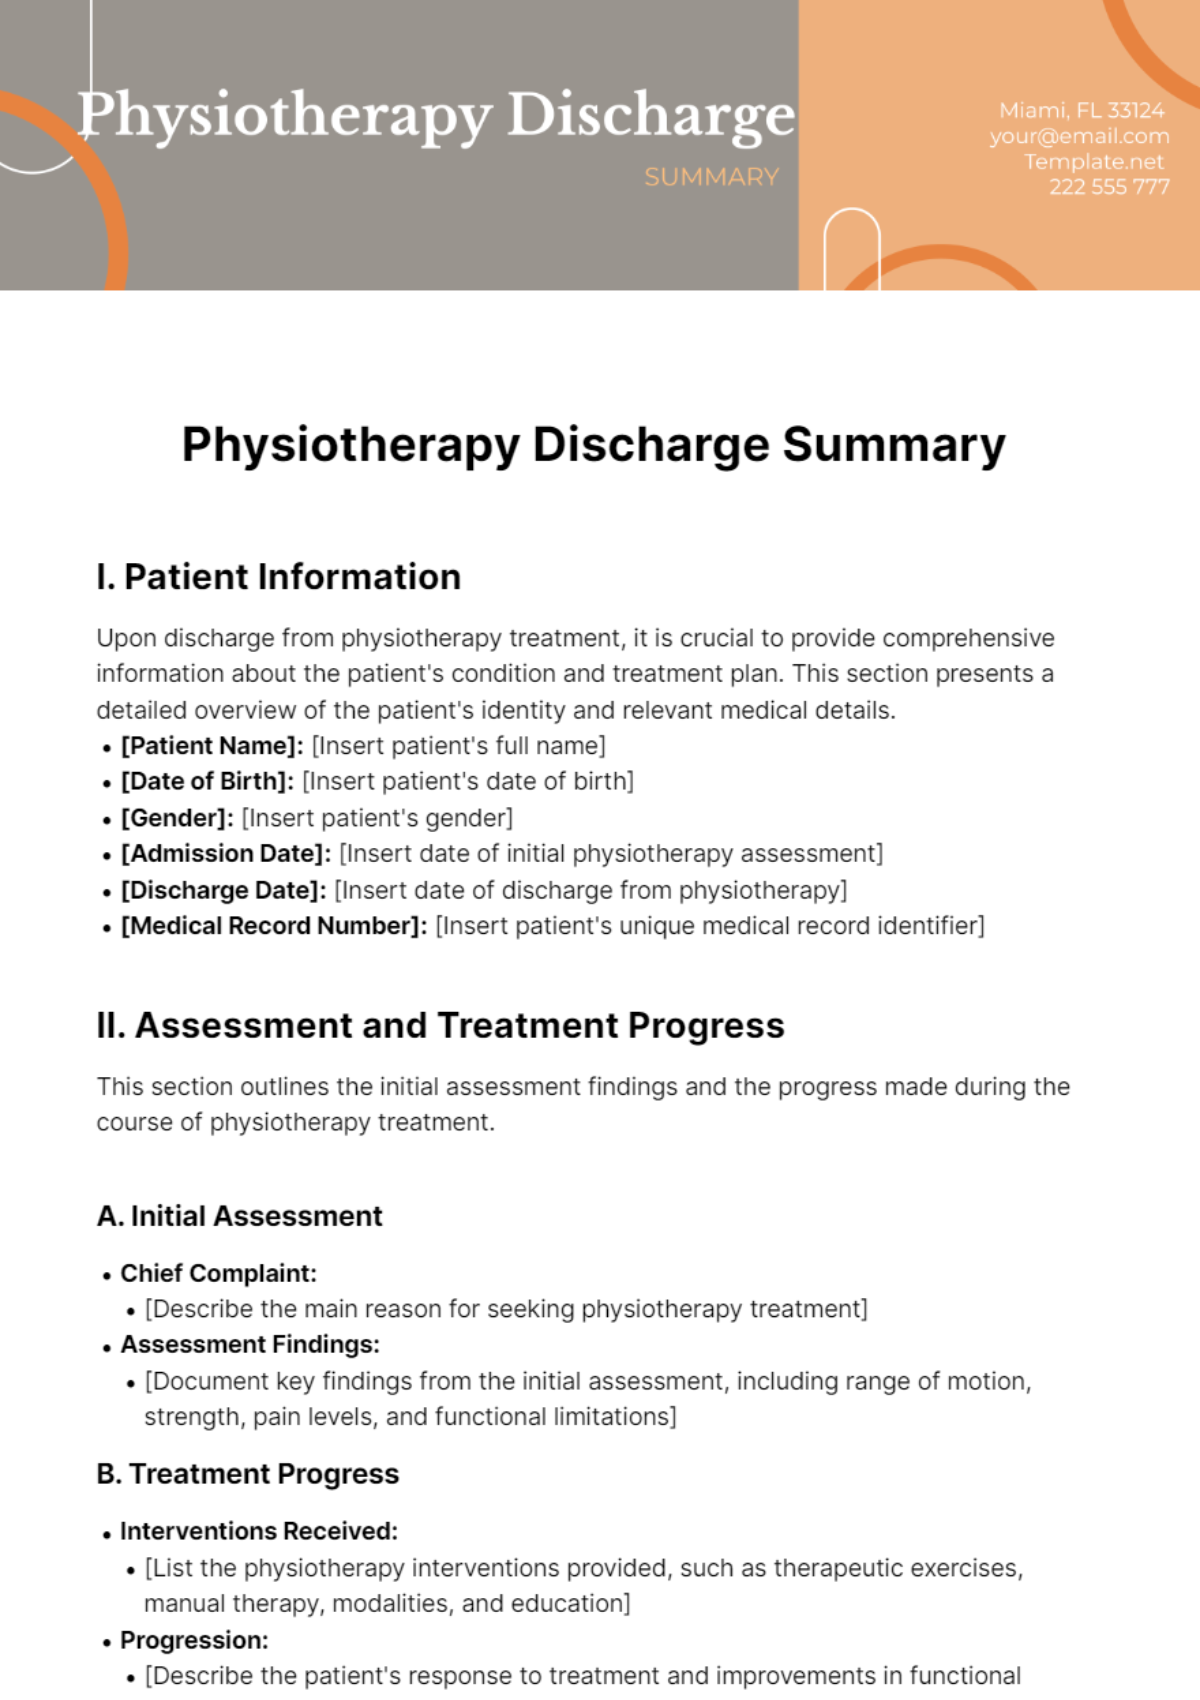 Free Physiotherapy Discharge Summary Template